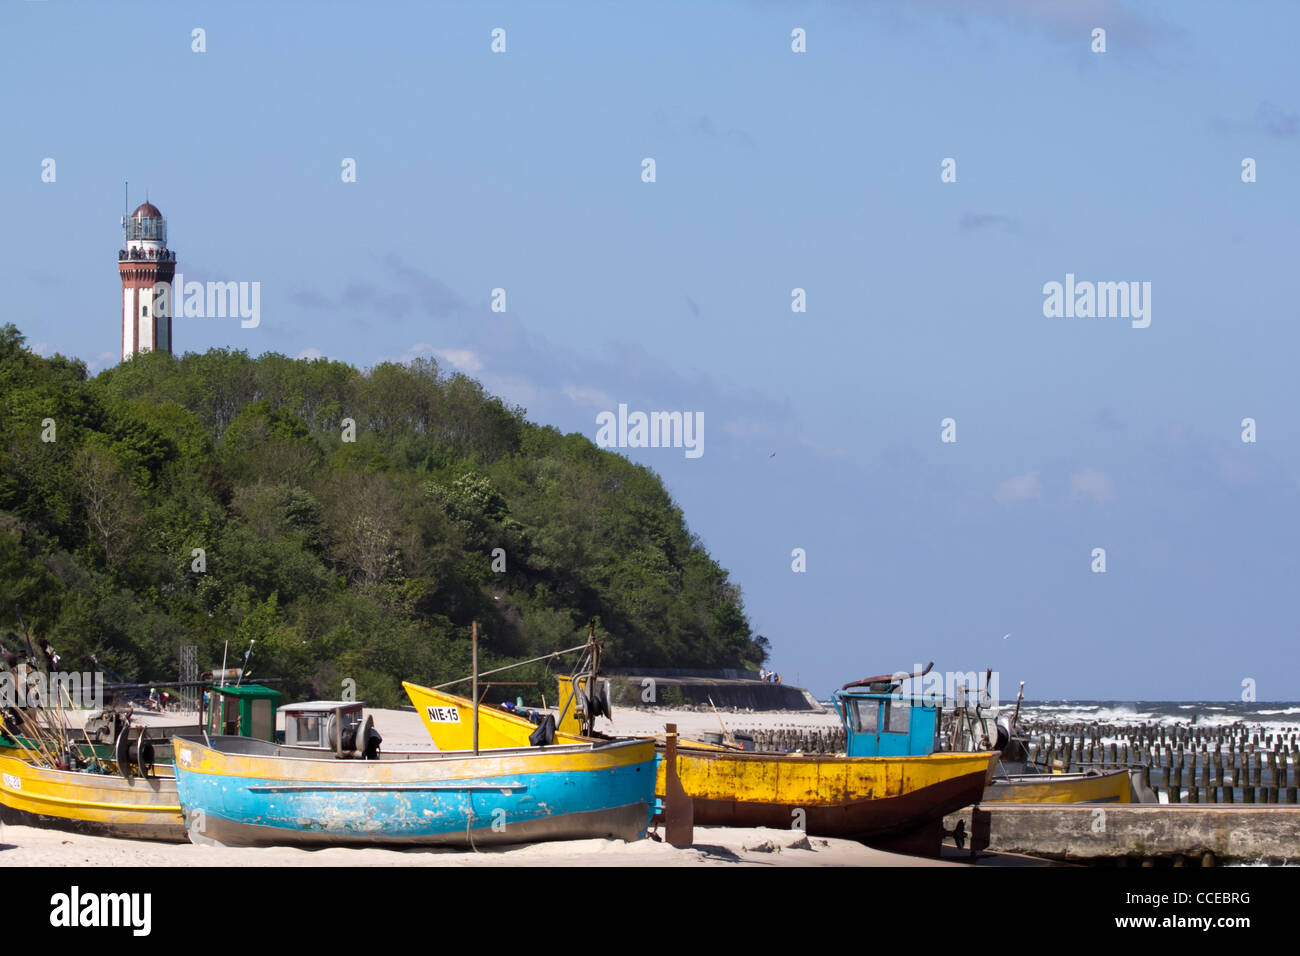 Fishing Boats on the beach in Niechorze. In the background, surrounded by trees you can see the lighthouse. Stock Photo